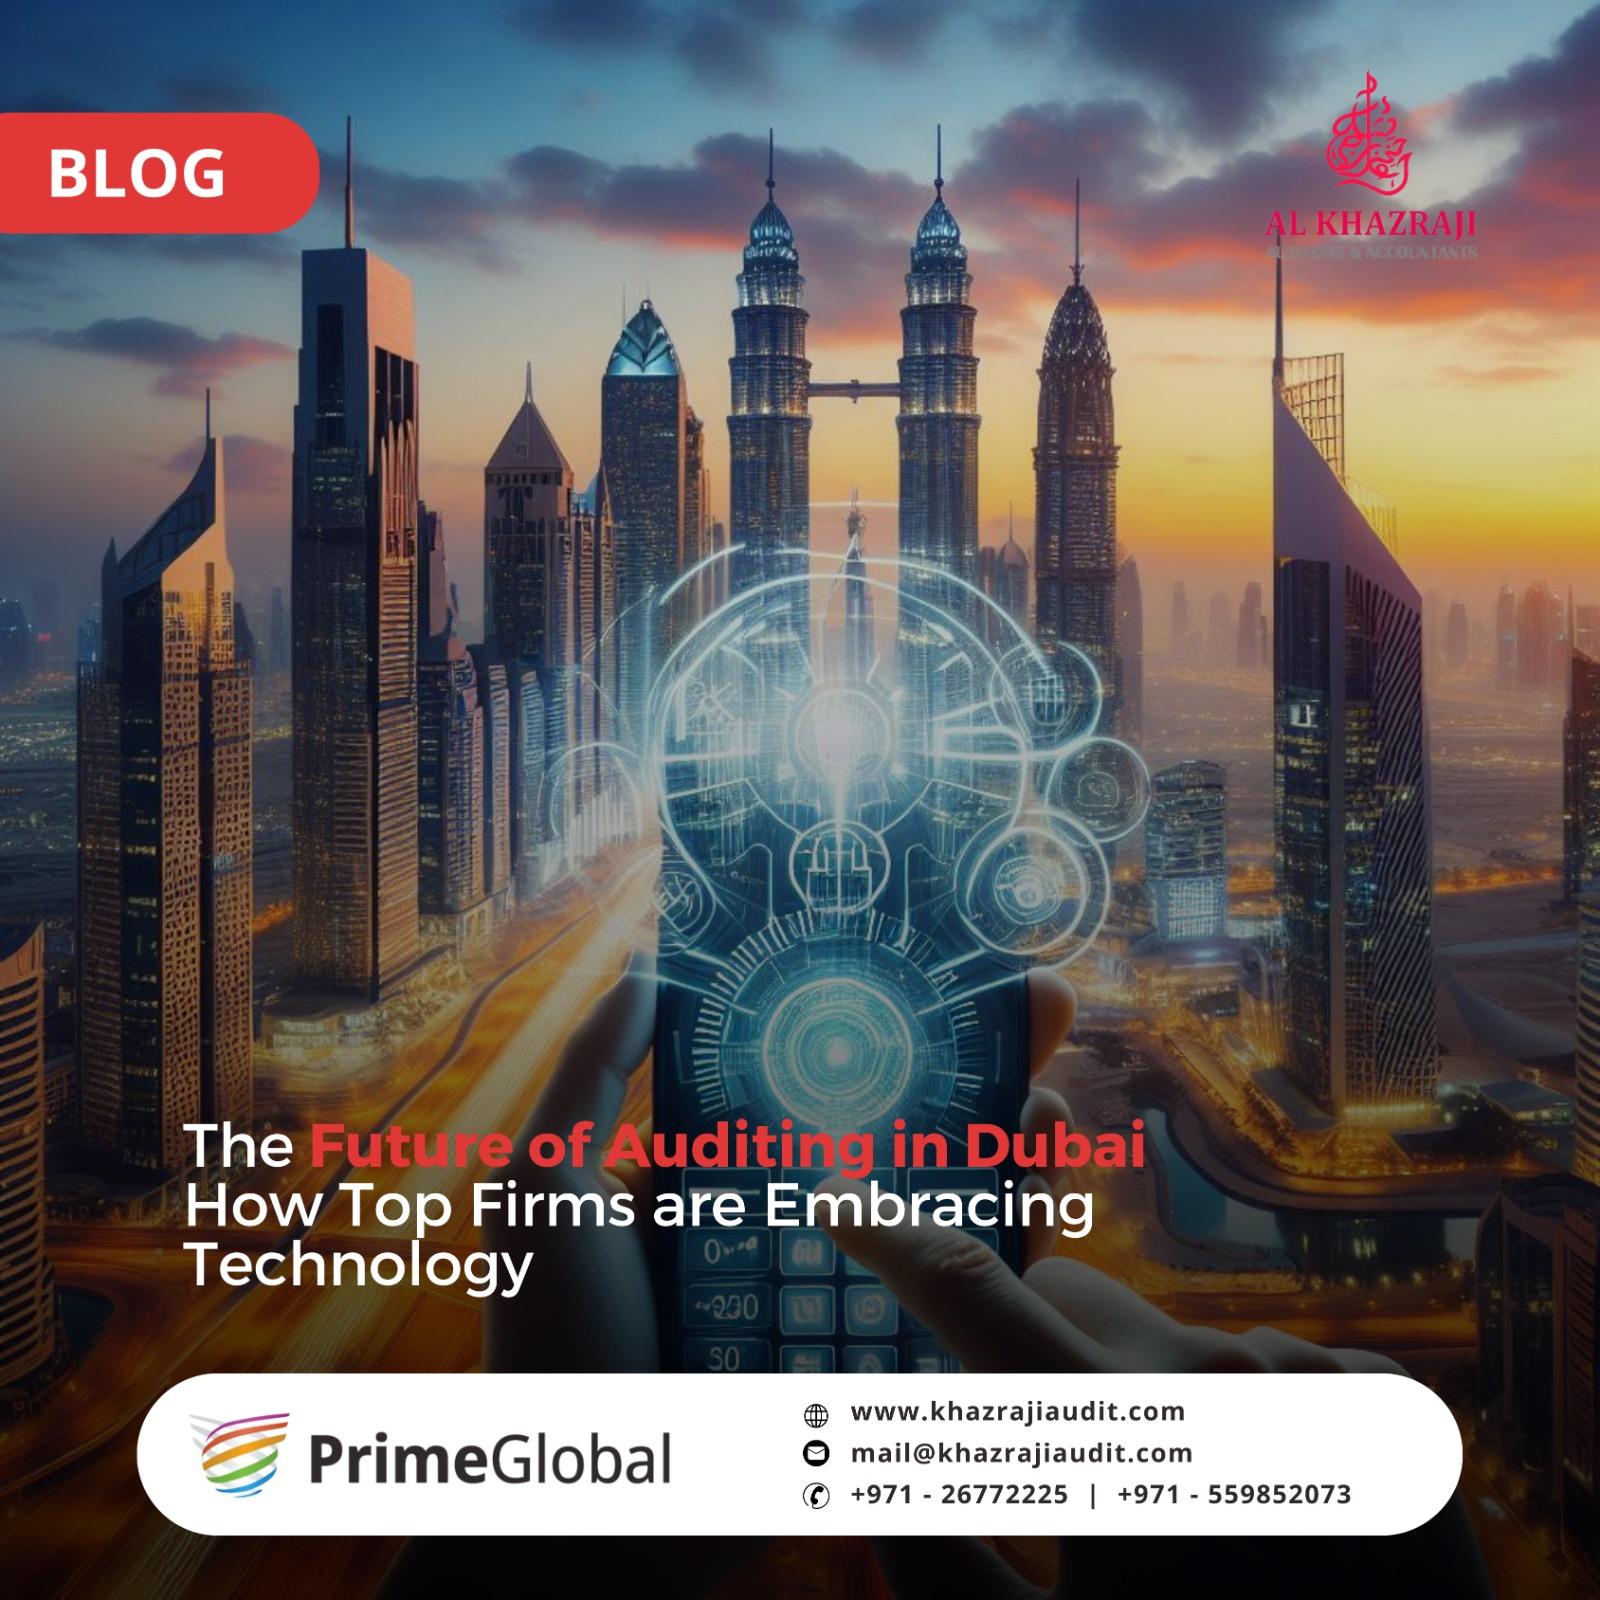 The Future of Auditing in Dubai How Top Firms are Embracing Technology